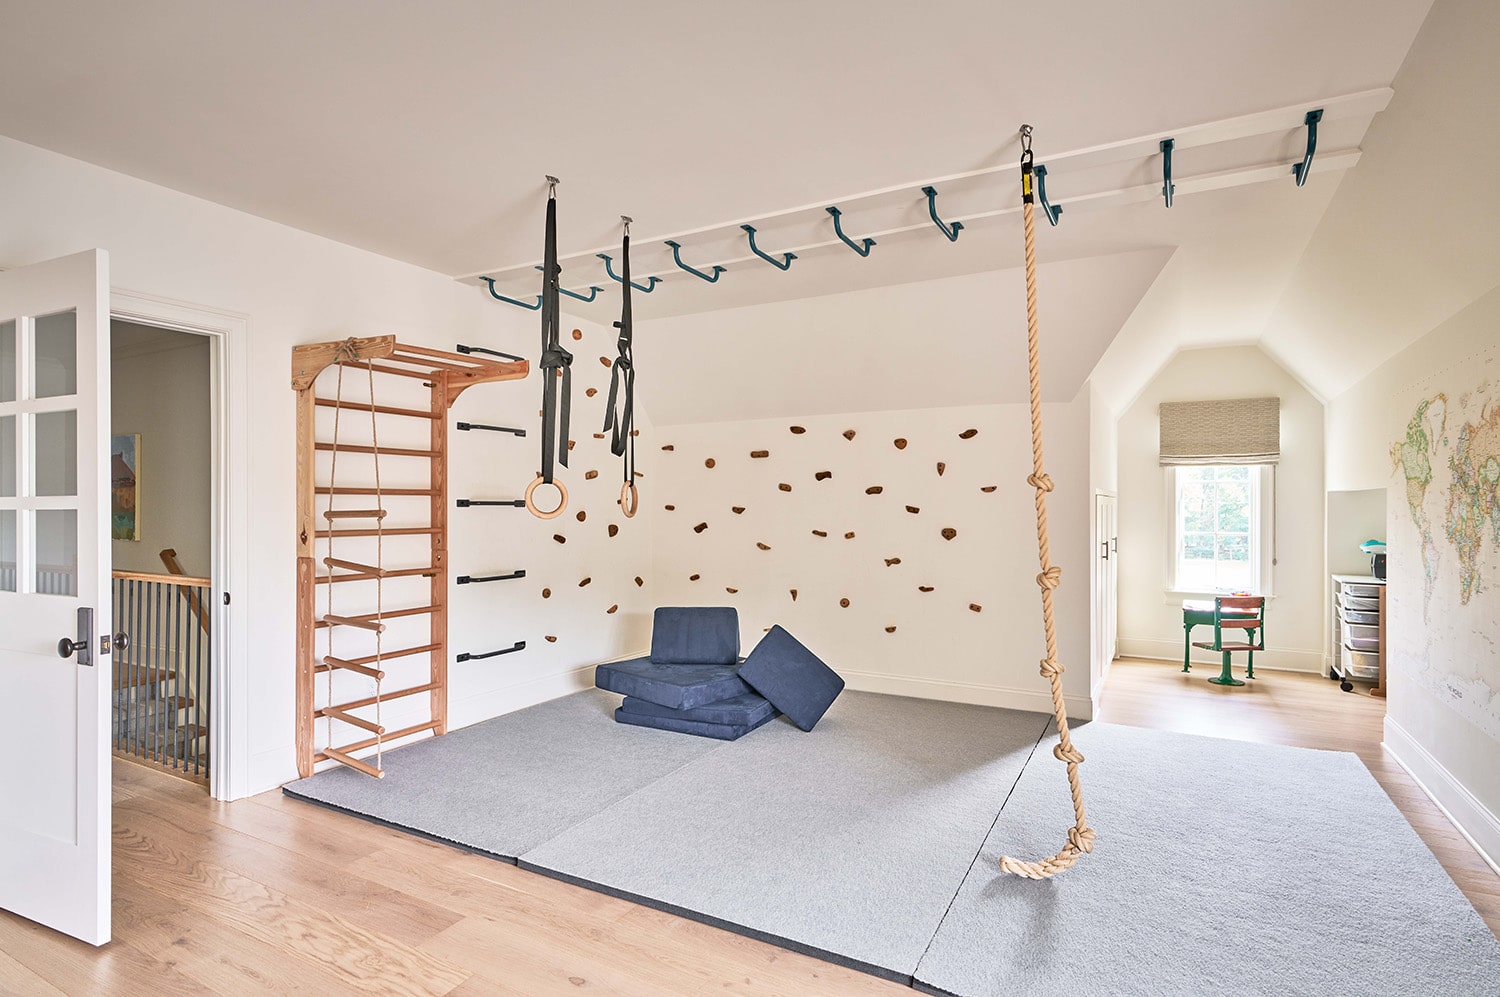 Children's playroom with climbing wall and jungle gym, custom home in Charlotte, NC